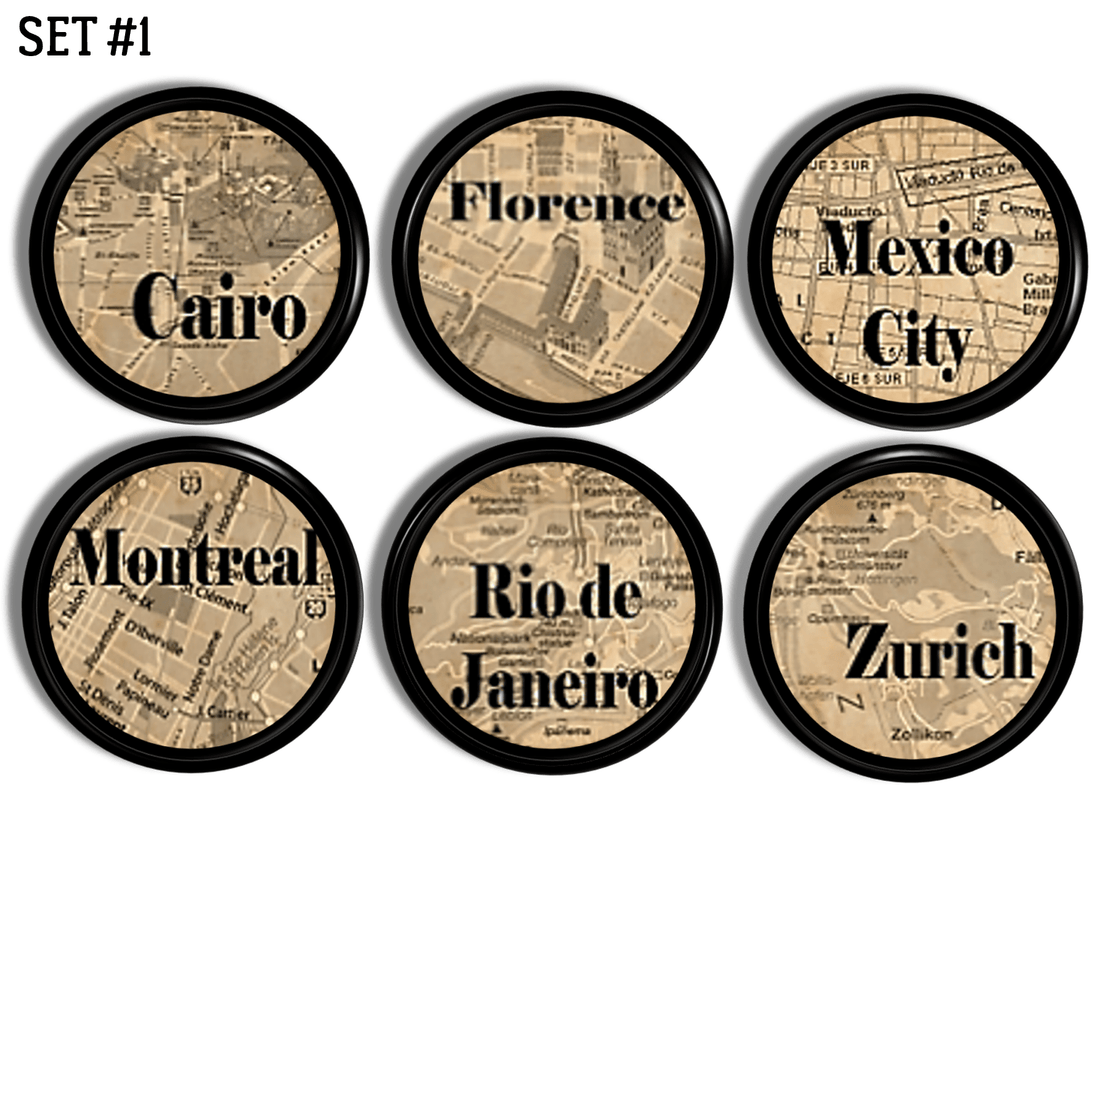 World travel decor cabinet drawer pulls. Handmade knobs in city maps for Cario, Mexico City, Rio De Janeiro and more